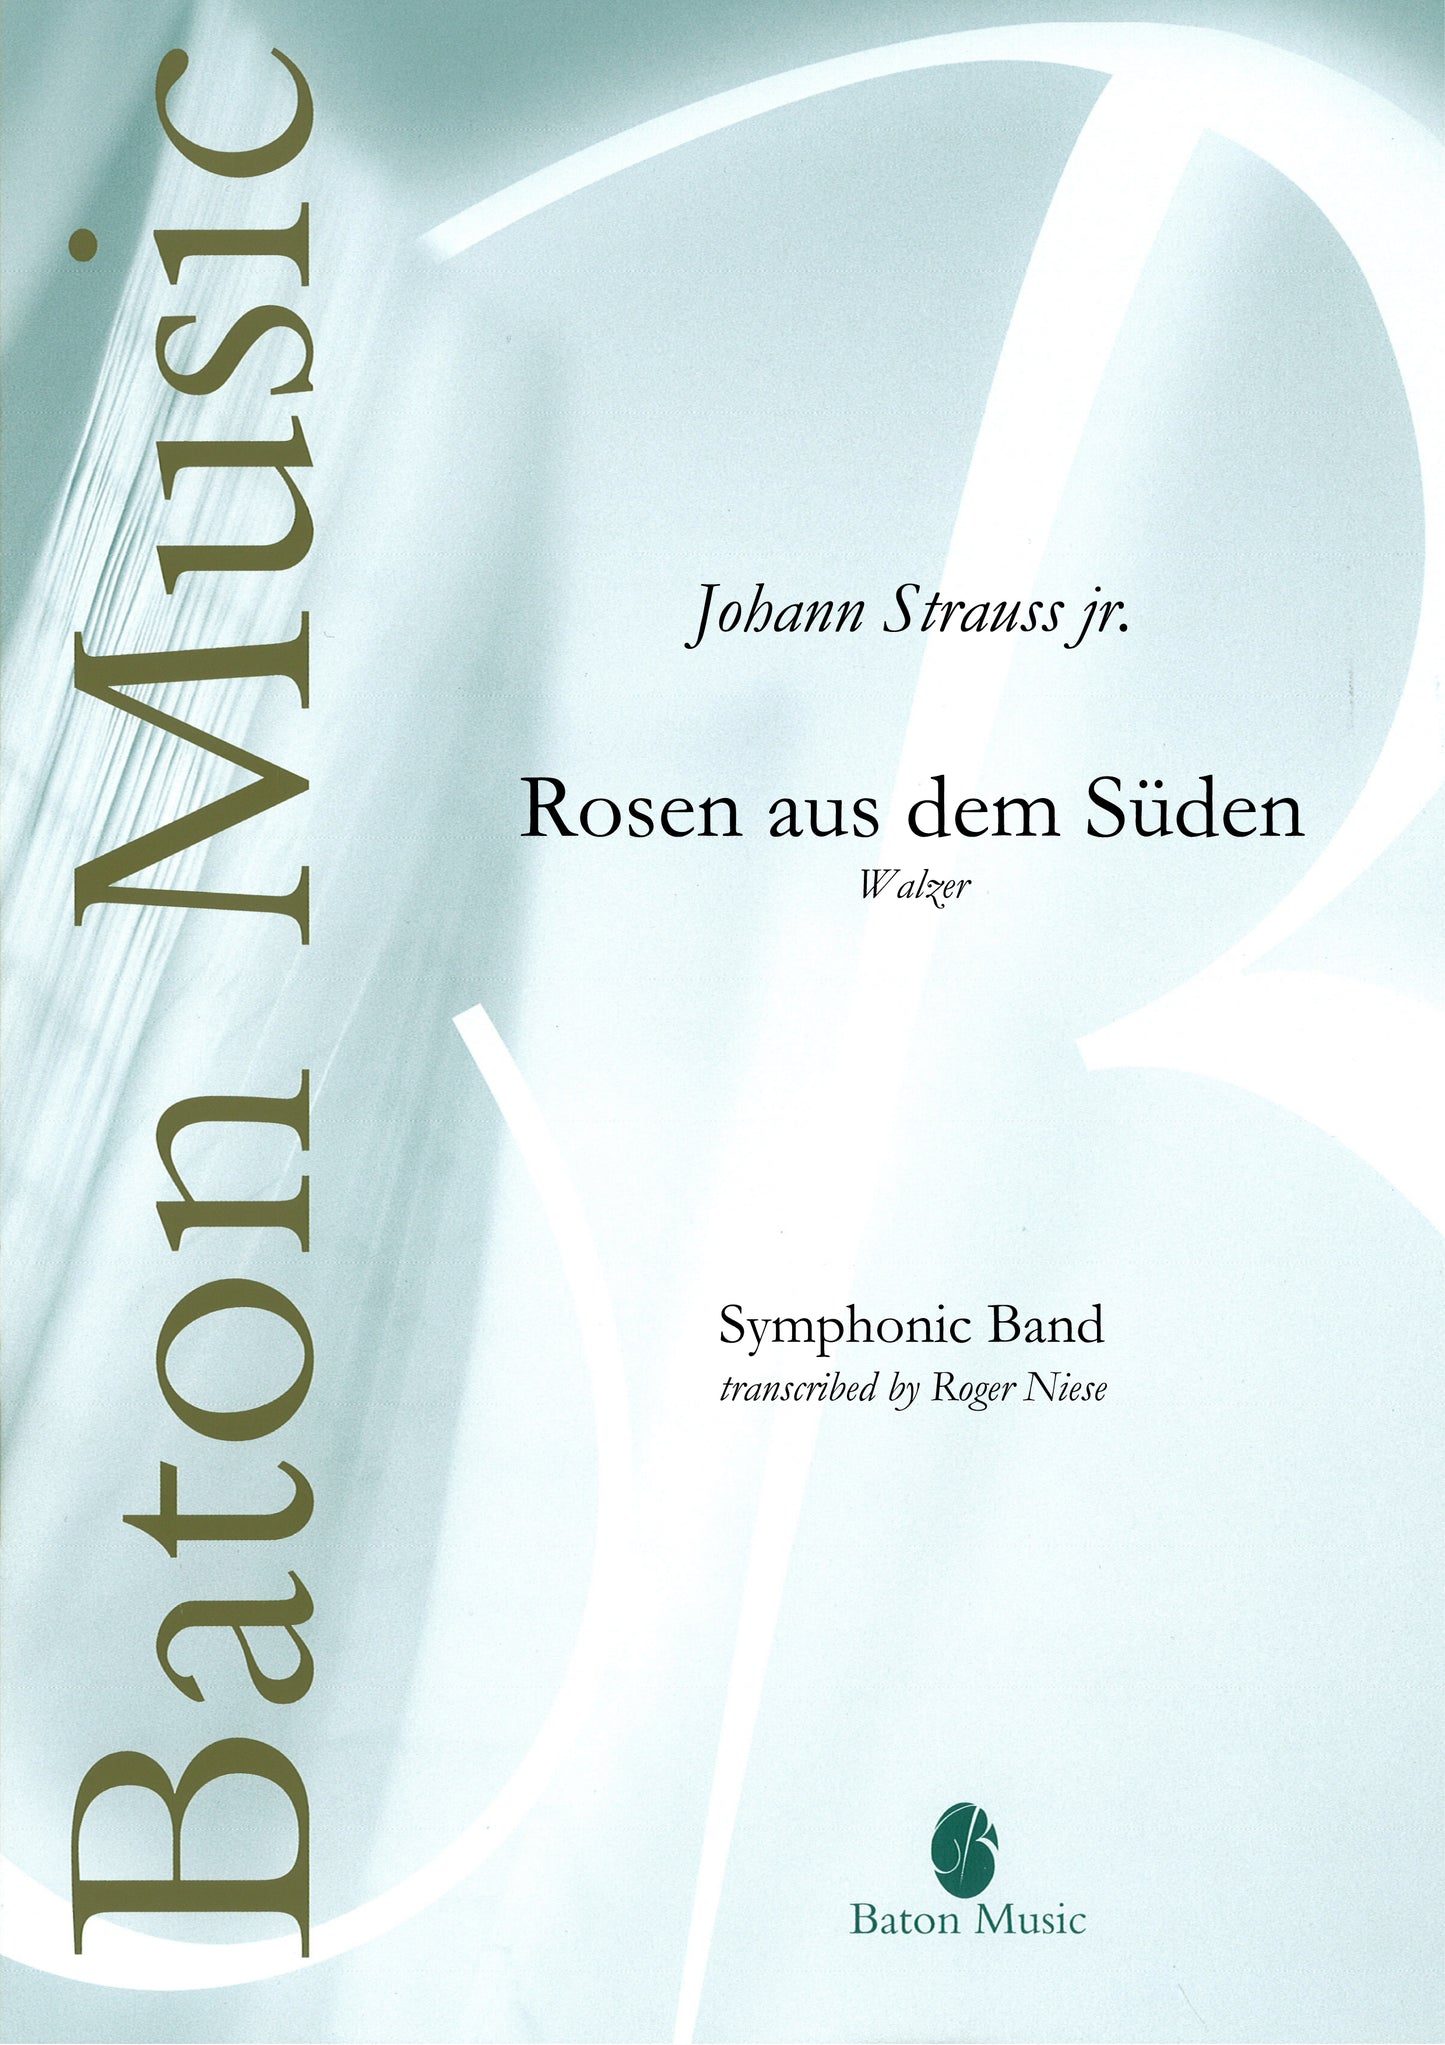 Roses from the South (Waltz) - Johann Strauss